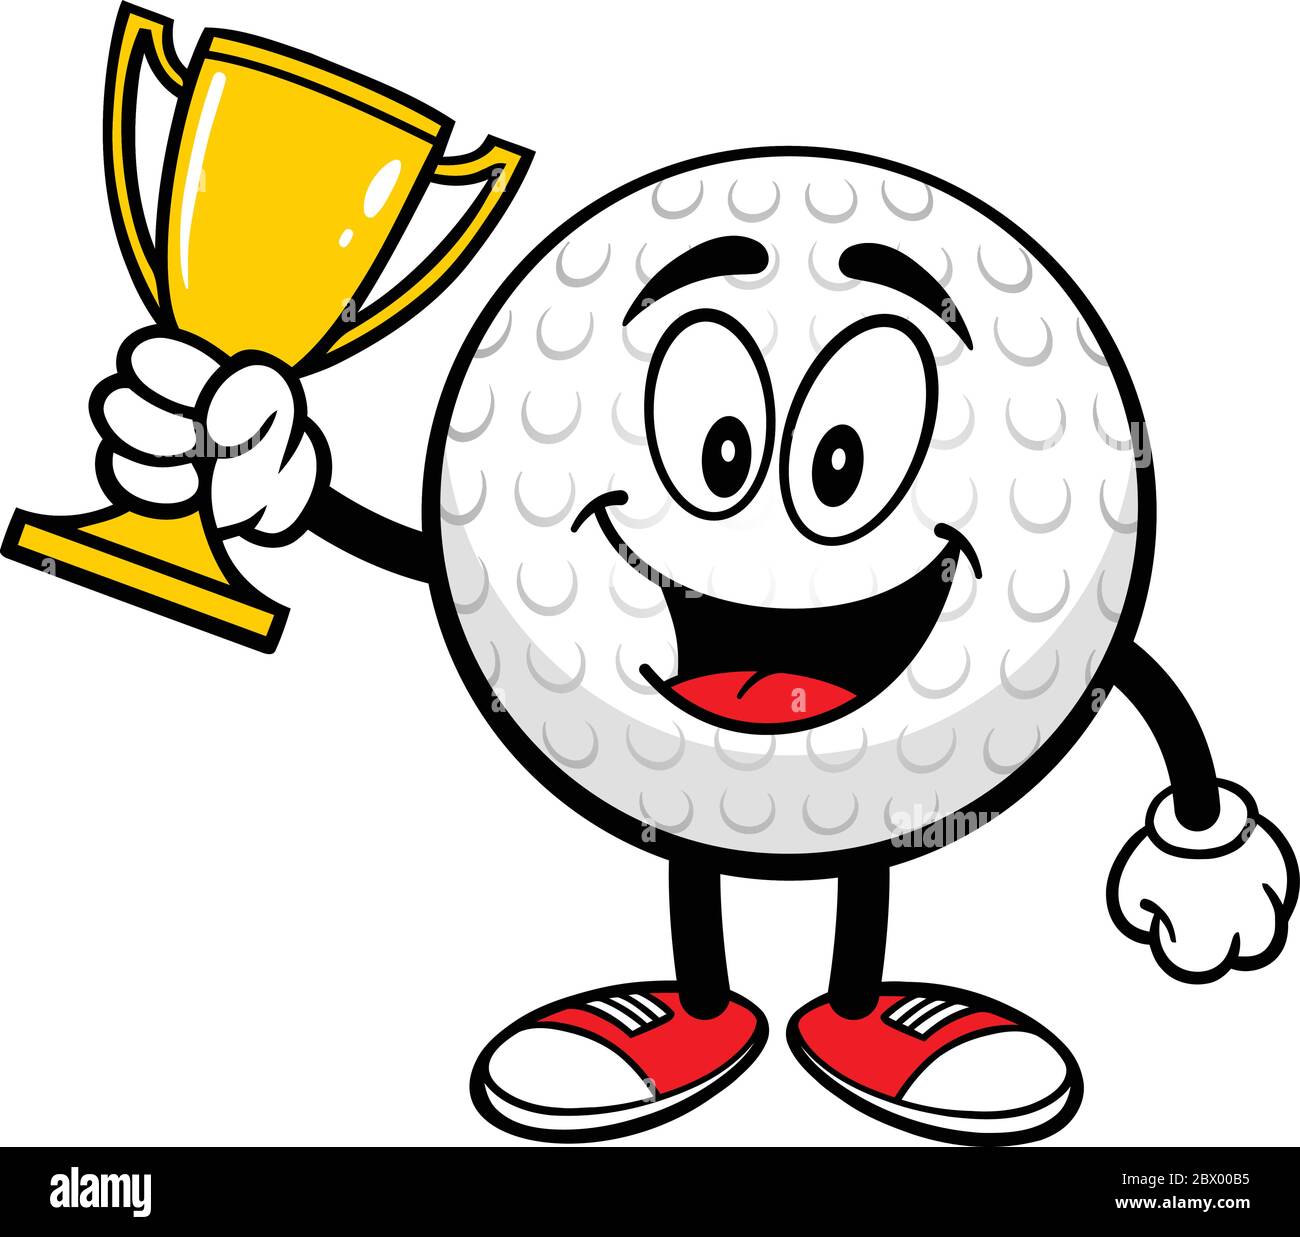 Golf cartoon Cut Out Stock Images & Pictures - Alamy